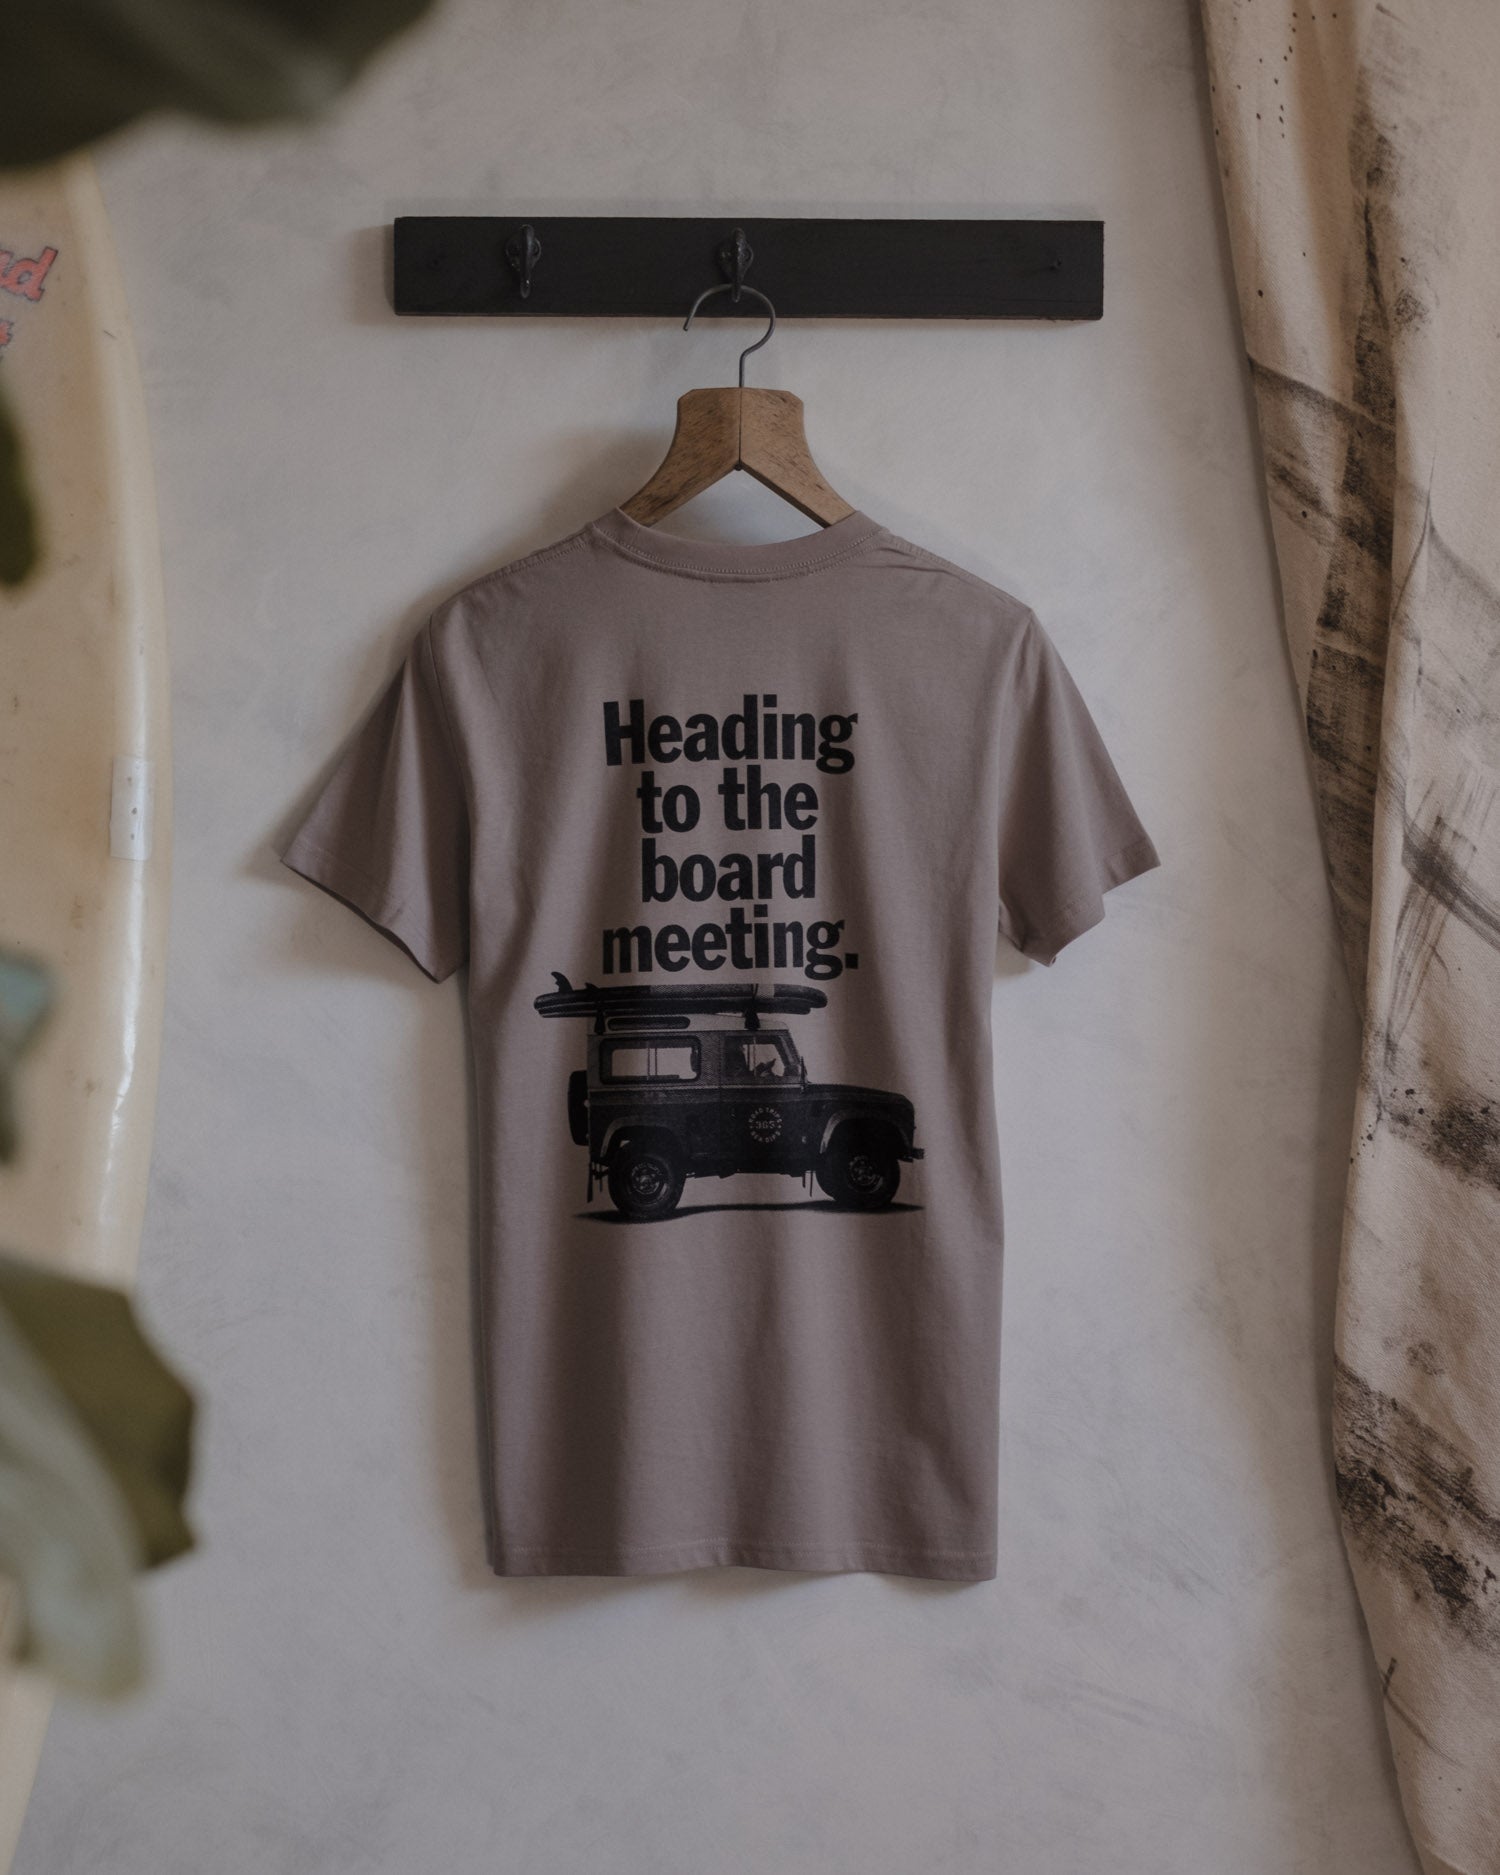 Heading the the board meeting t-shirt by Art Disco Original Goods